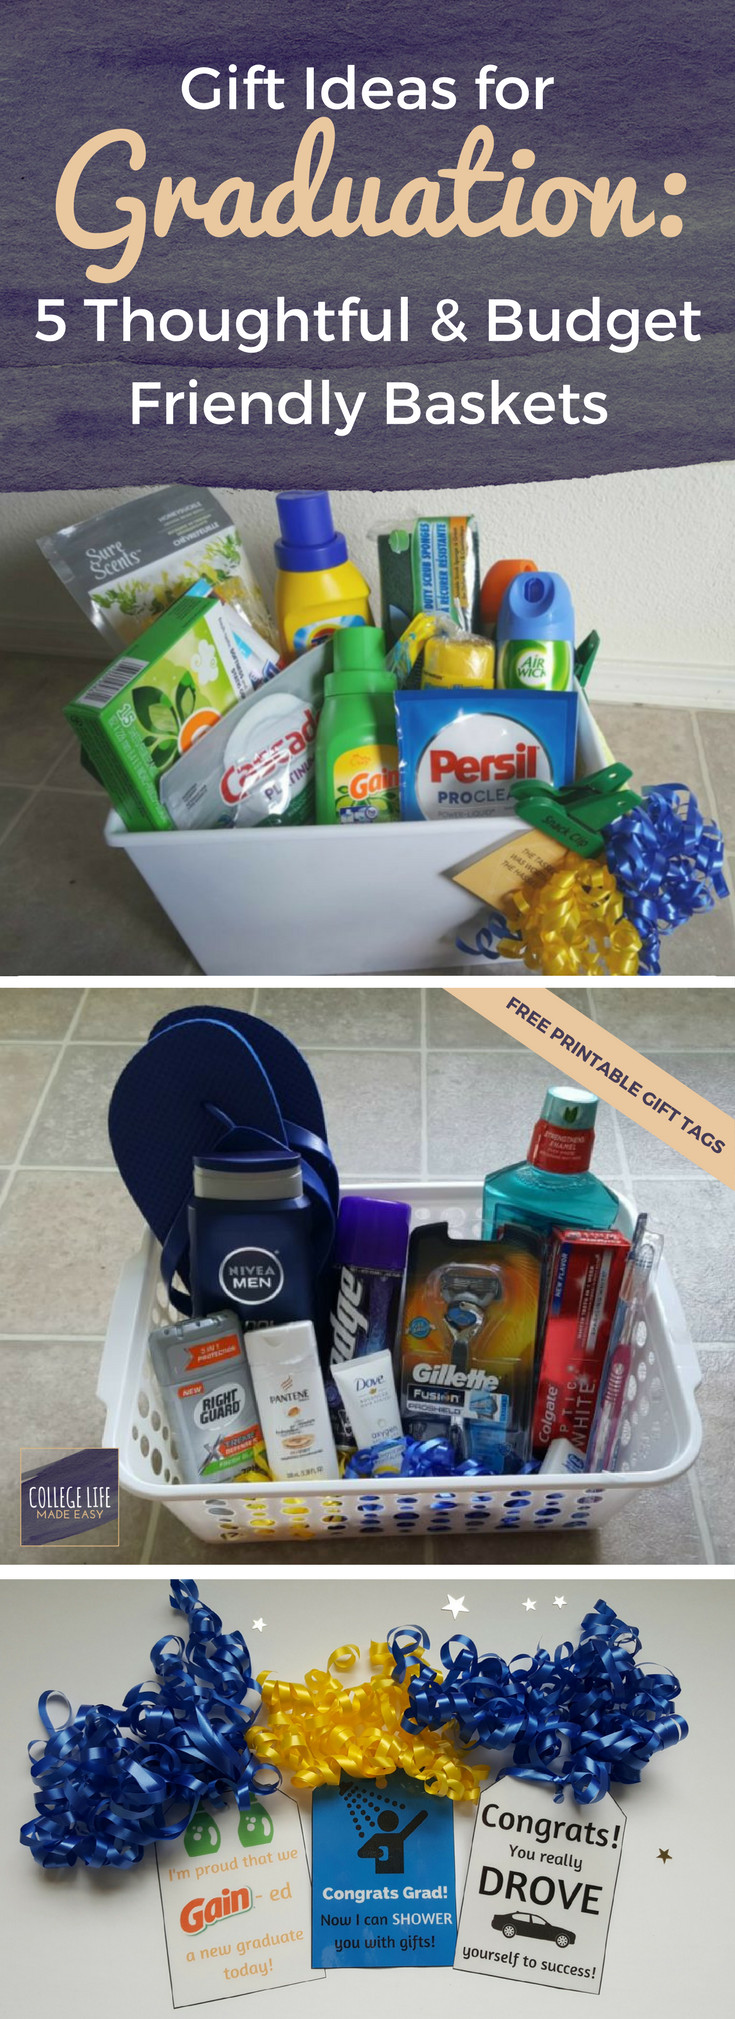 Homemade Graduation Gift Basket Ideas
 5 DIY Going Away to College Gift Basket Ideas for Boys